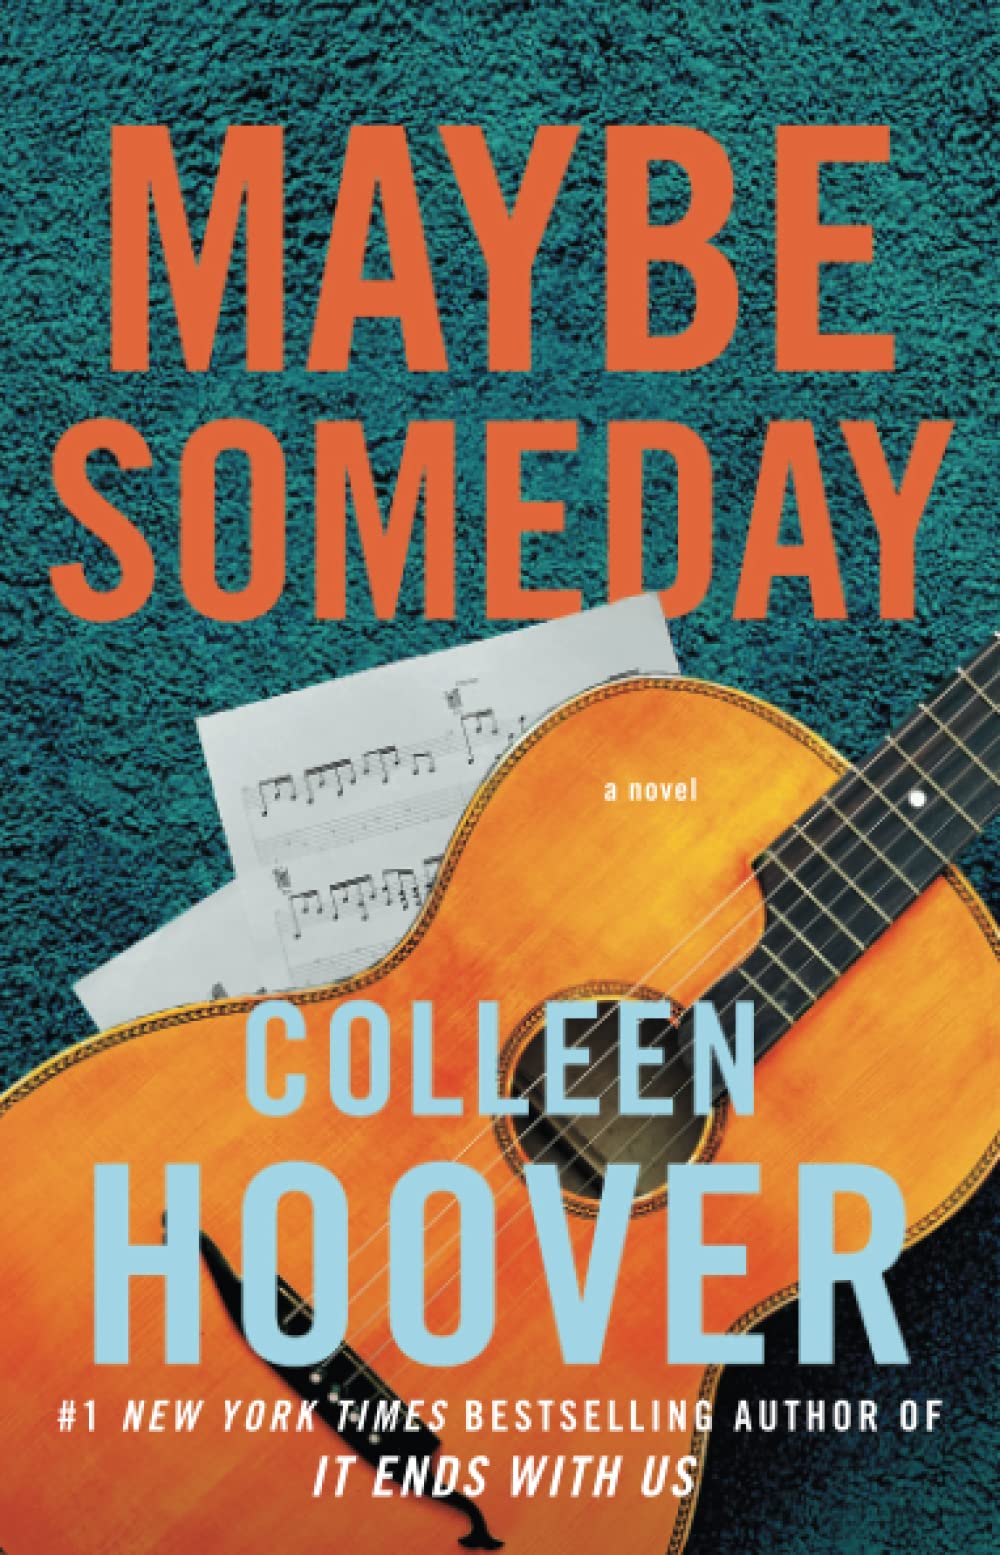 MAYBE SOMEDAY by COLLEEN HOOVER